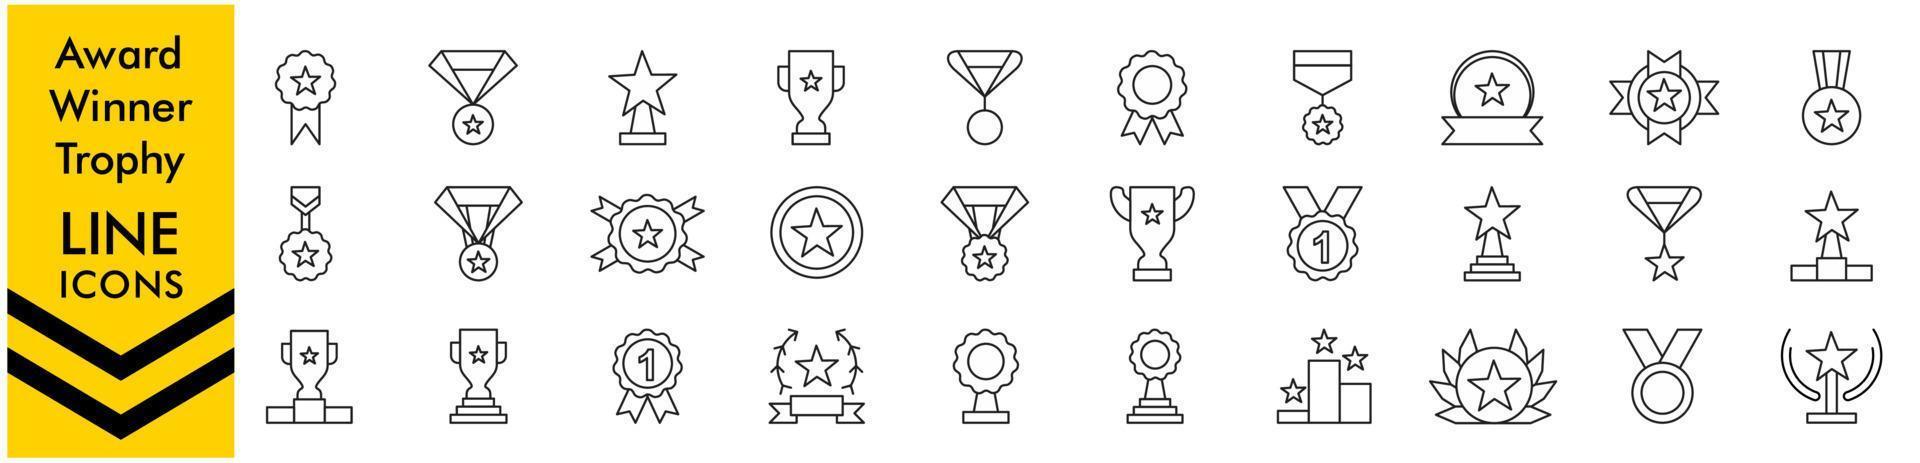 Awards line icons. Awards line icon collection Trophy cup, Medal, Winner, Award, prize icon. Vector